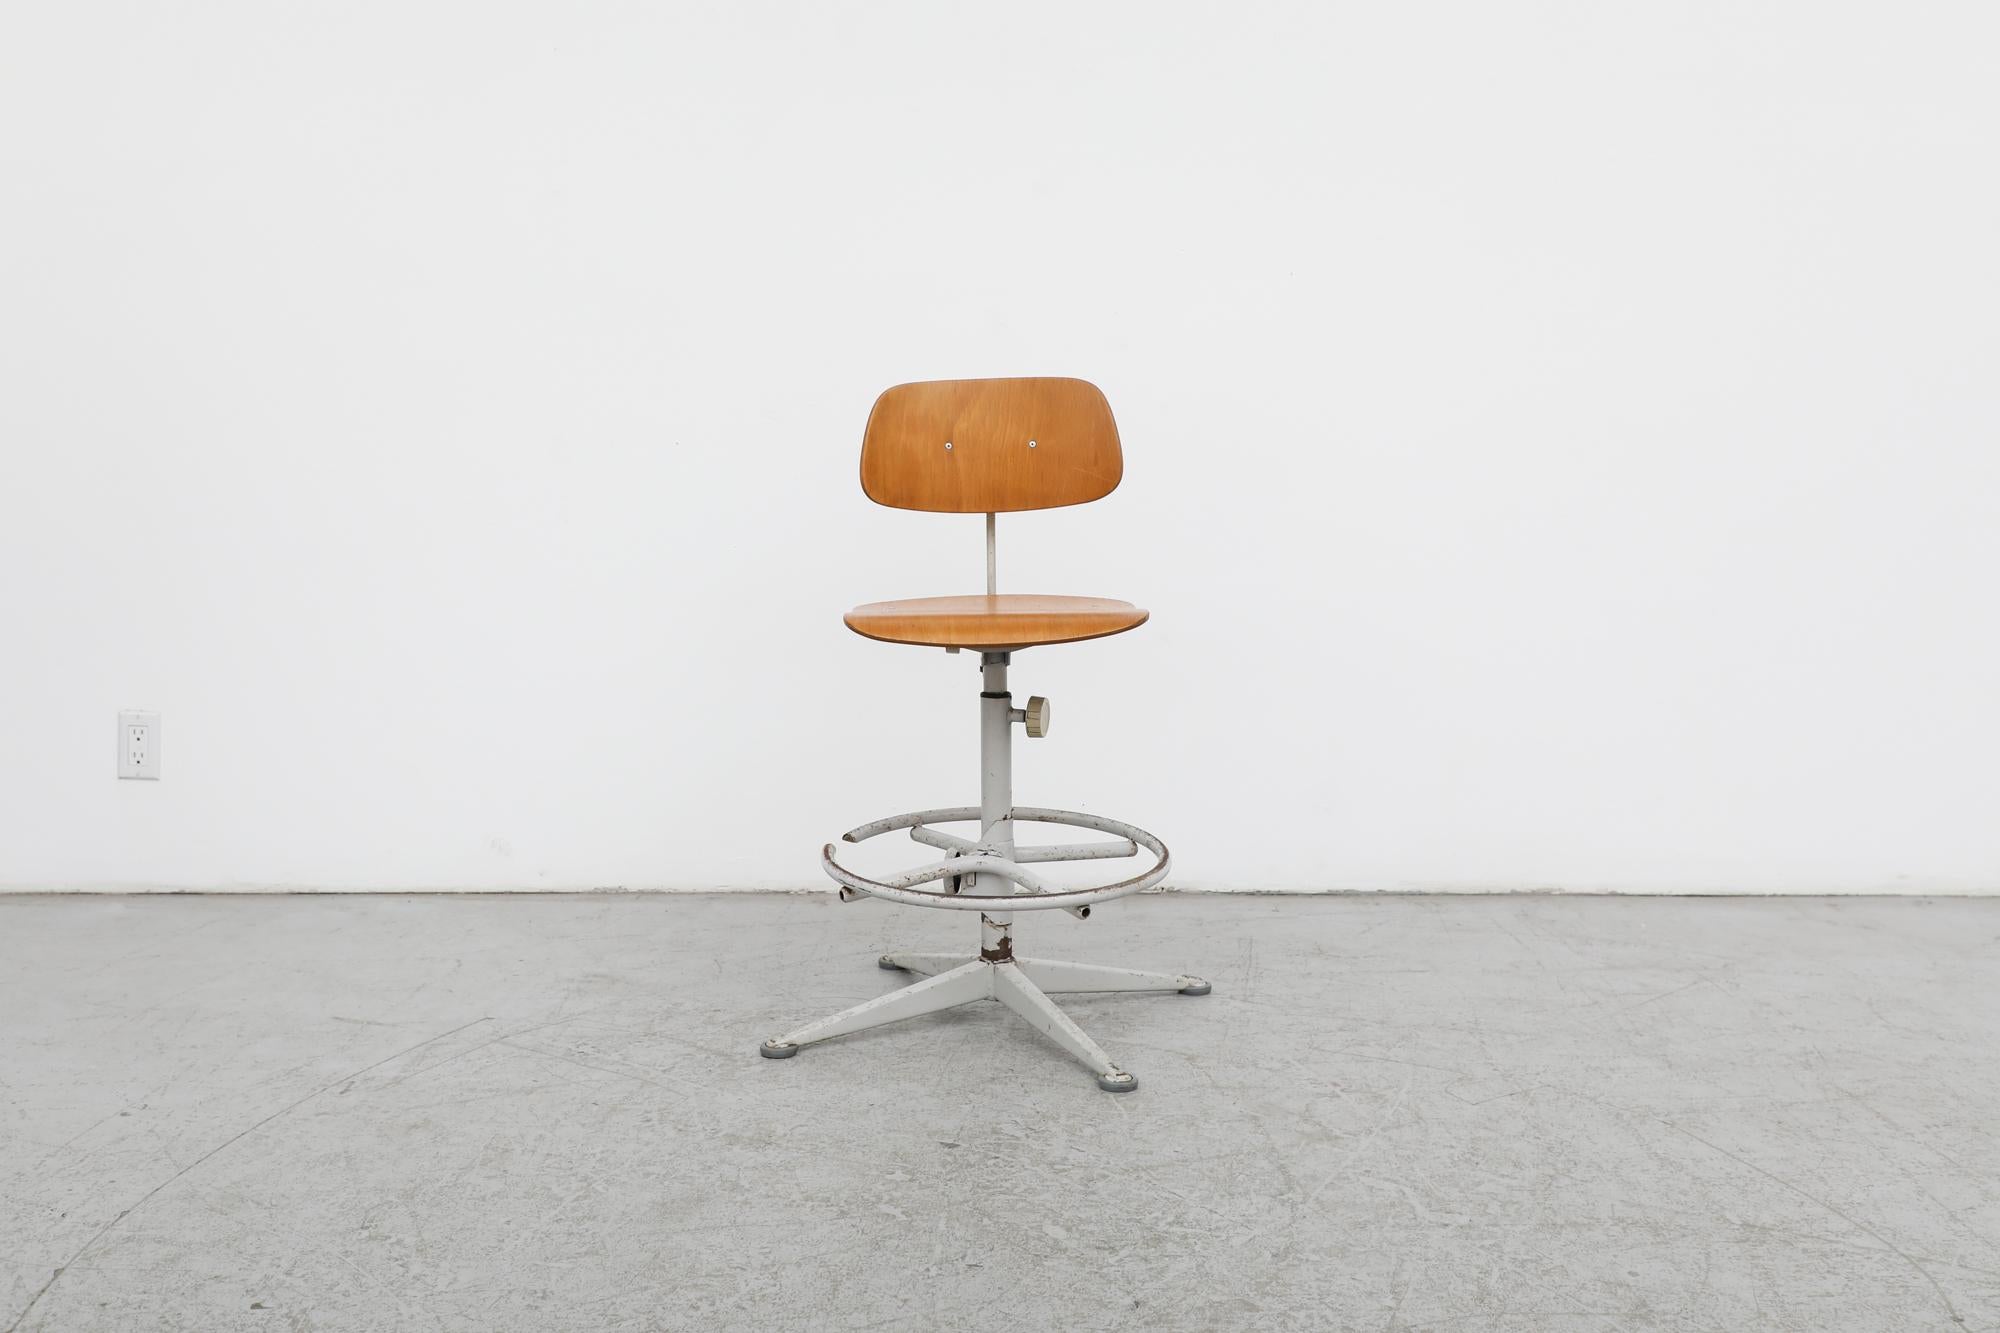 Authentic Friso Kramer designed industrial drafting stool for Dutch Mid-Century office furniture manufacturer Ahrend de Cirkel, circa 1950s. Grey enameled metal frame paired with a plywood seat and backrest. Height adjustable seat and footrest with